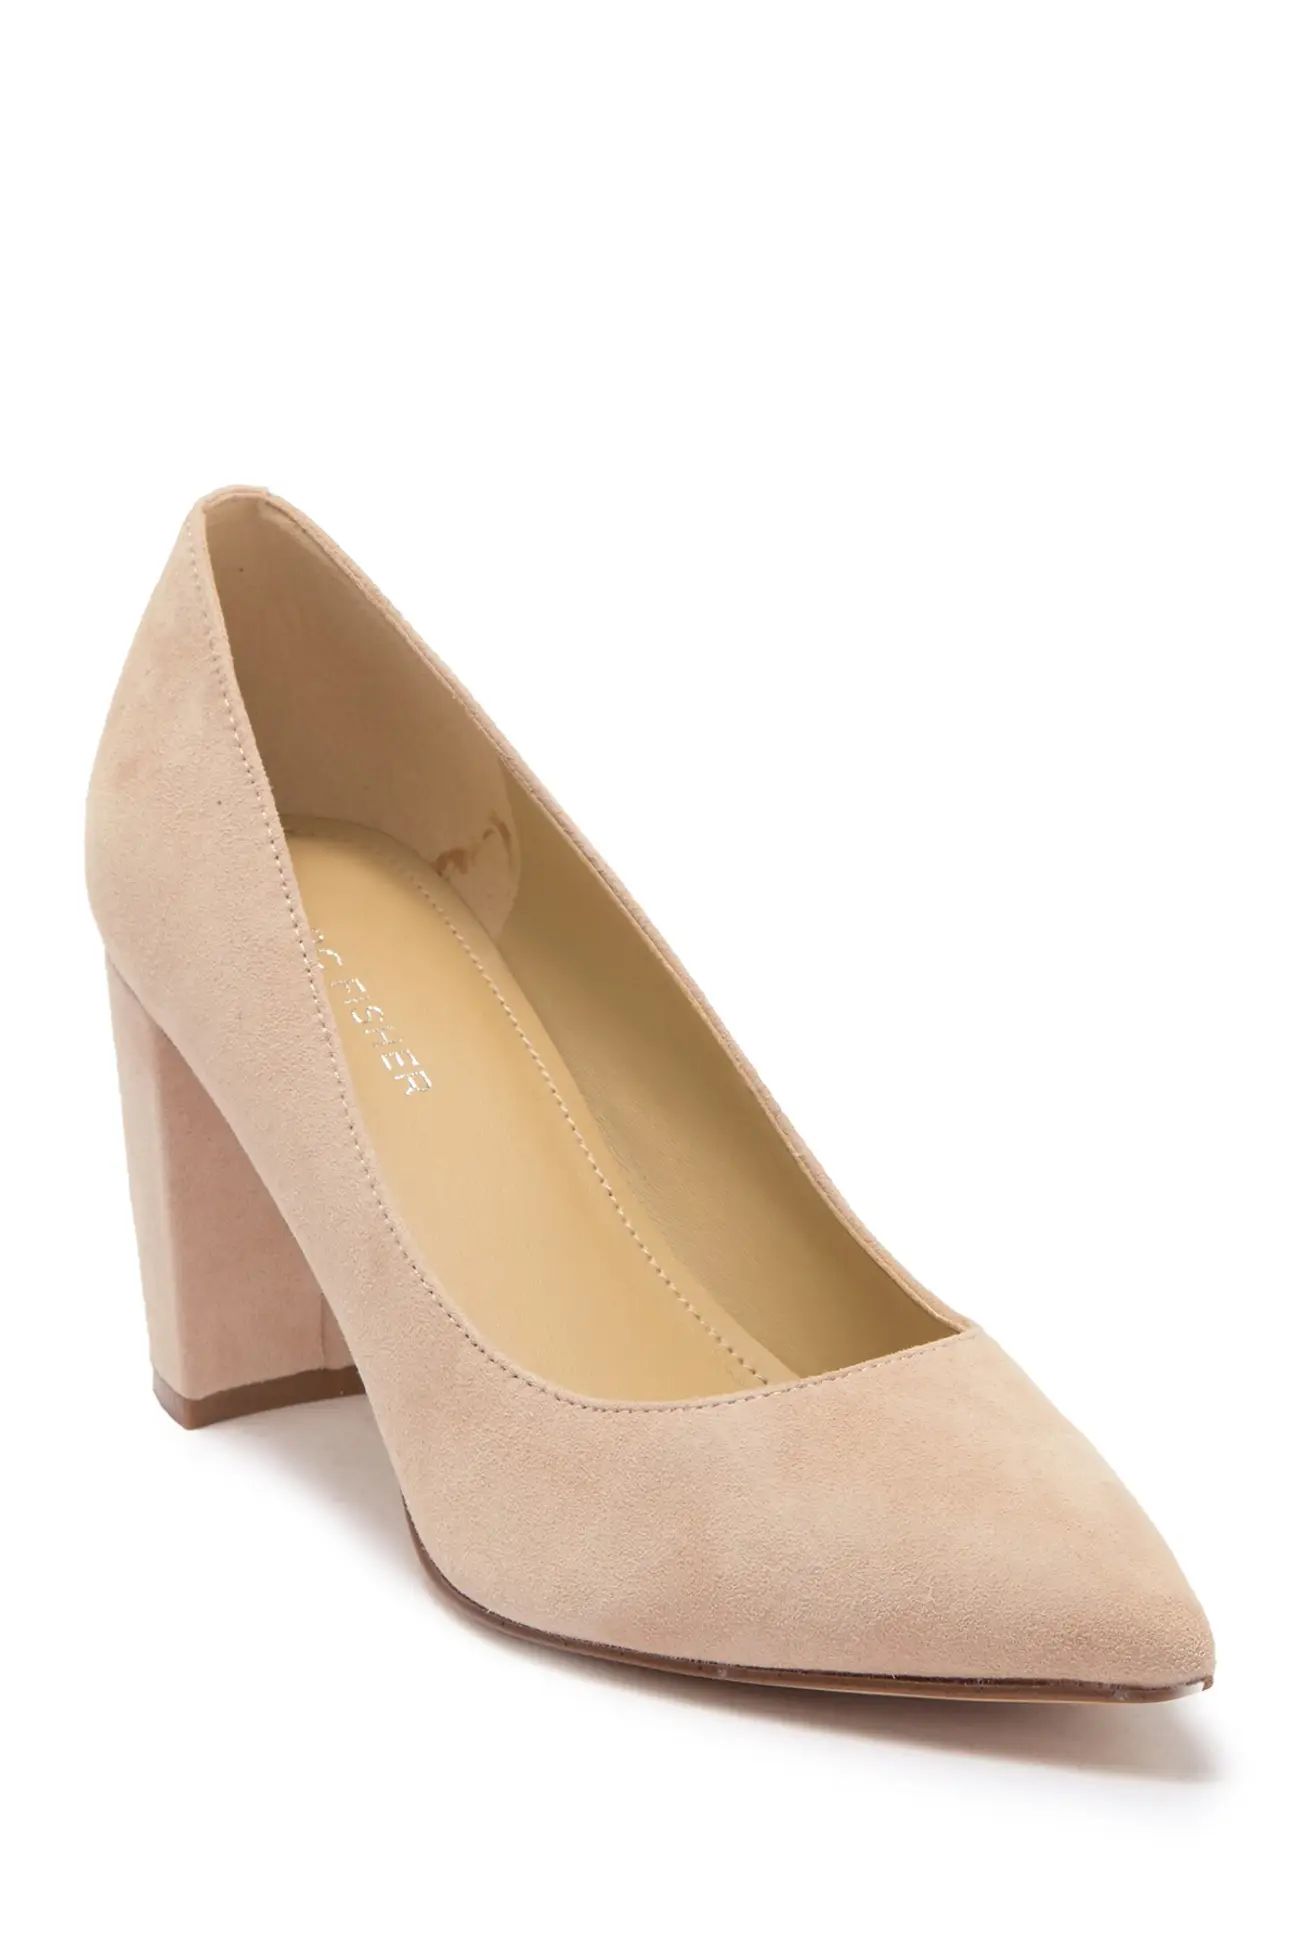 Marc Fisher | Claire Pointed Toe Pump | Nordstrom Rack | Nordstrom Rack